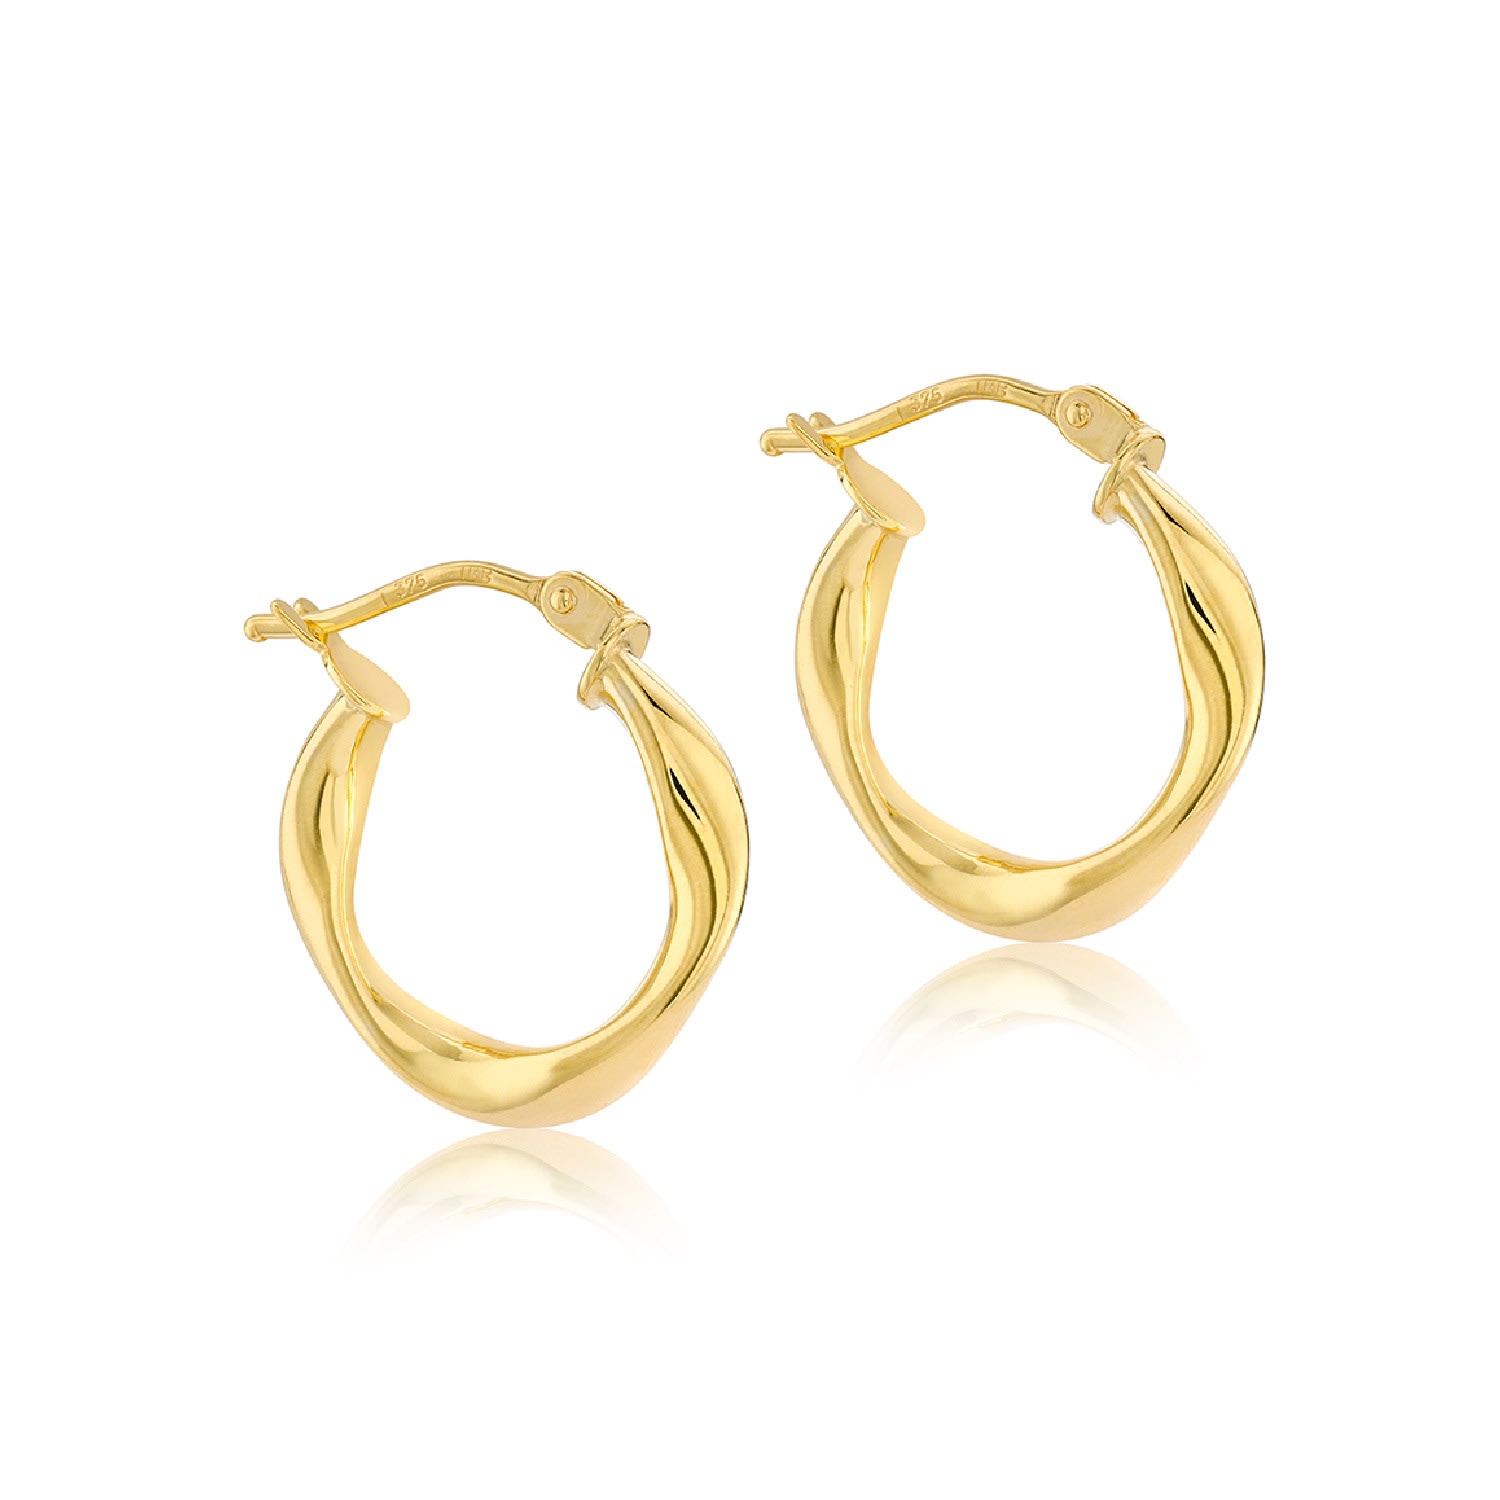 Women's Gold Plated Twisted Creole Hoop Earrings Posh Totty Designs